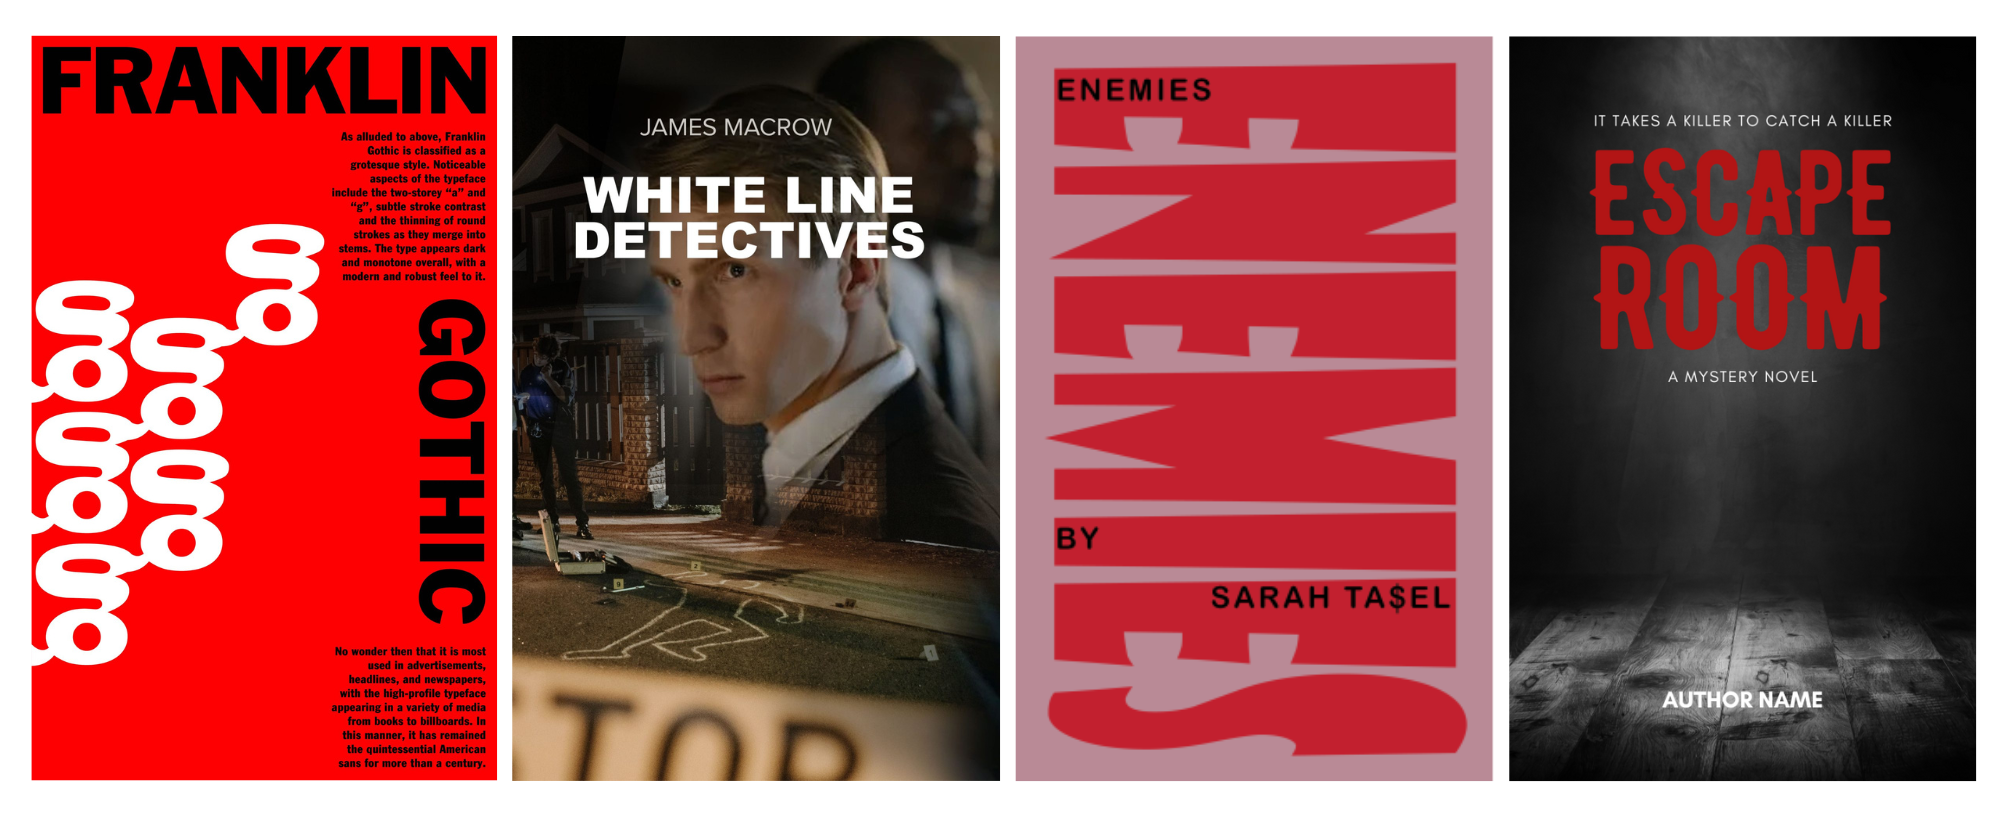 A series of four book covers. From left to right: 1) "Franklin Gothic" in bold red and black typography with an abstract design. 2) "White Line Detectives" features a man in a suit with a cityscape background. 3) "Enemies" in bold red text on a light pink background. 4) "Escape Room" with a dark, menacing theme and the tagline, "It takes a killer to catch a killer. BookSelf Book Cover Design & Premade Book Covers